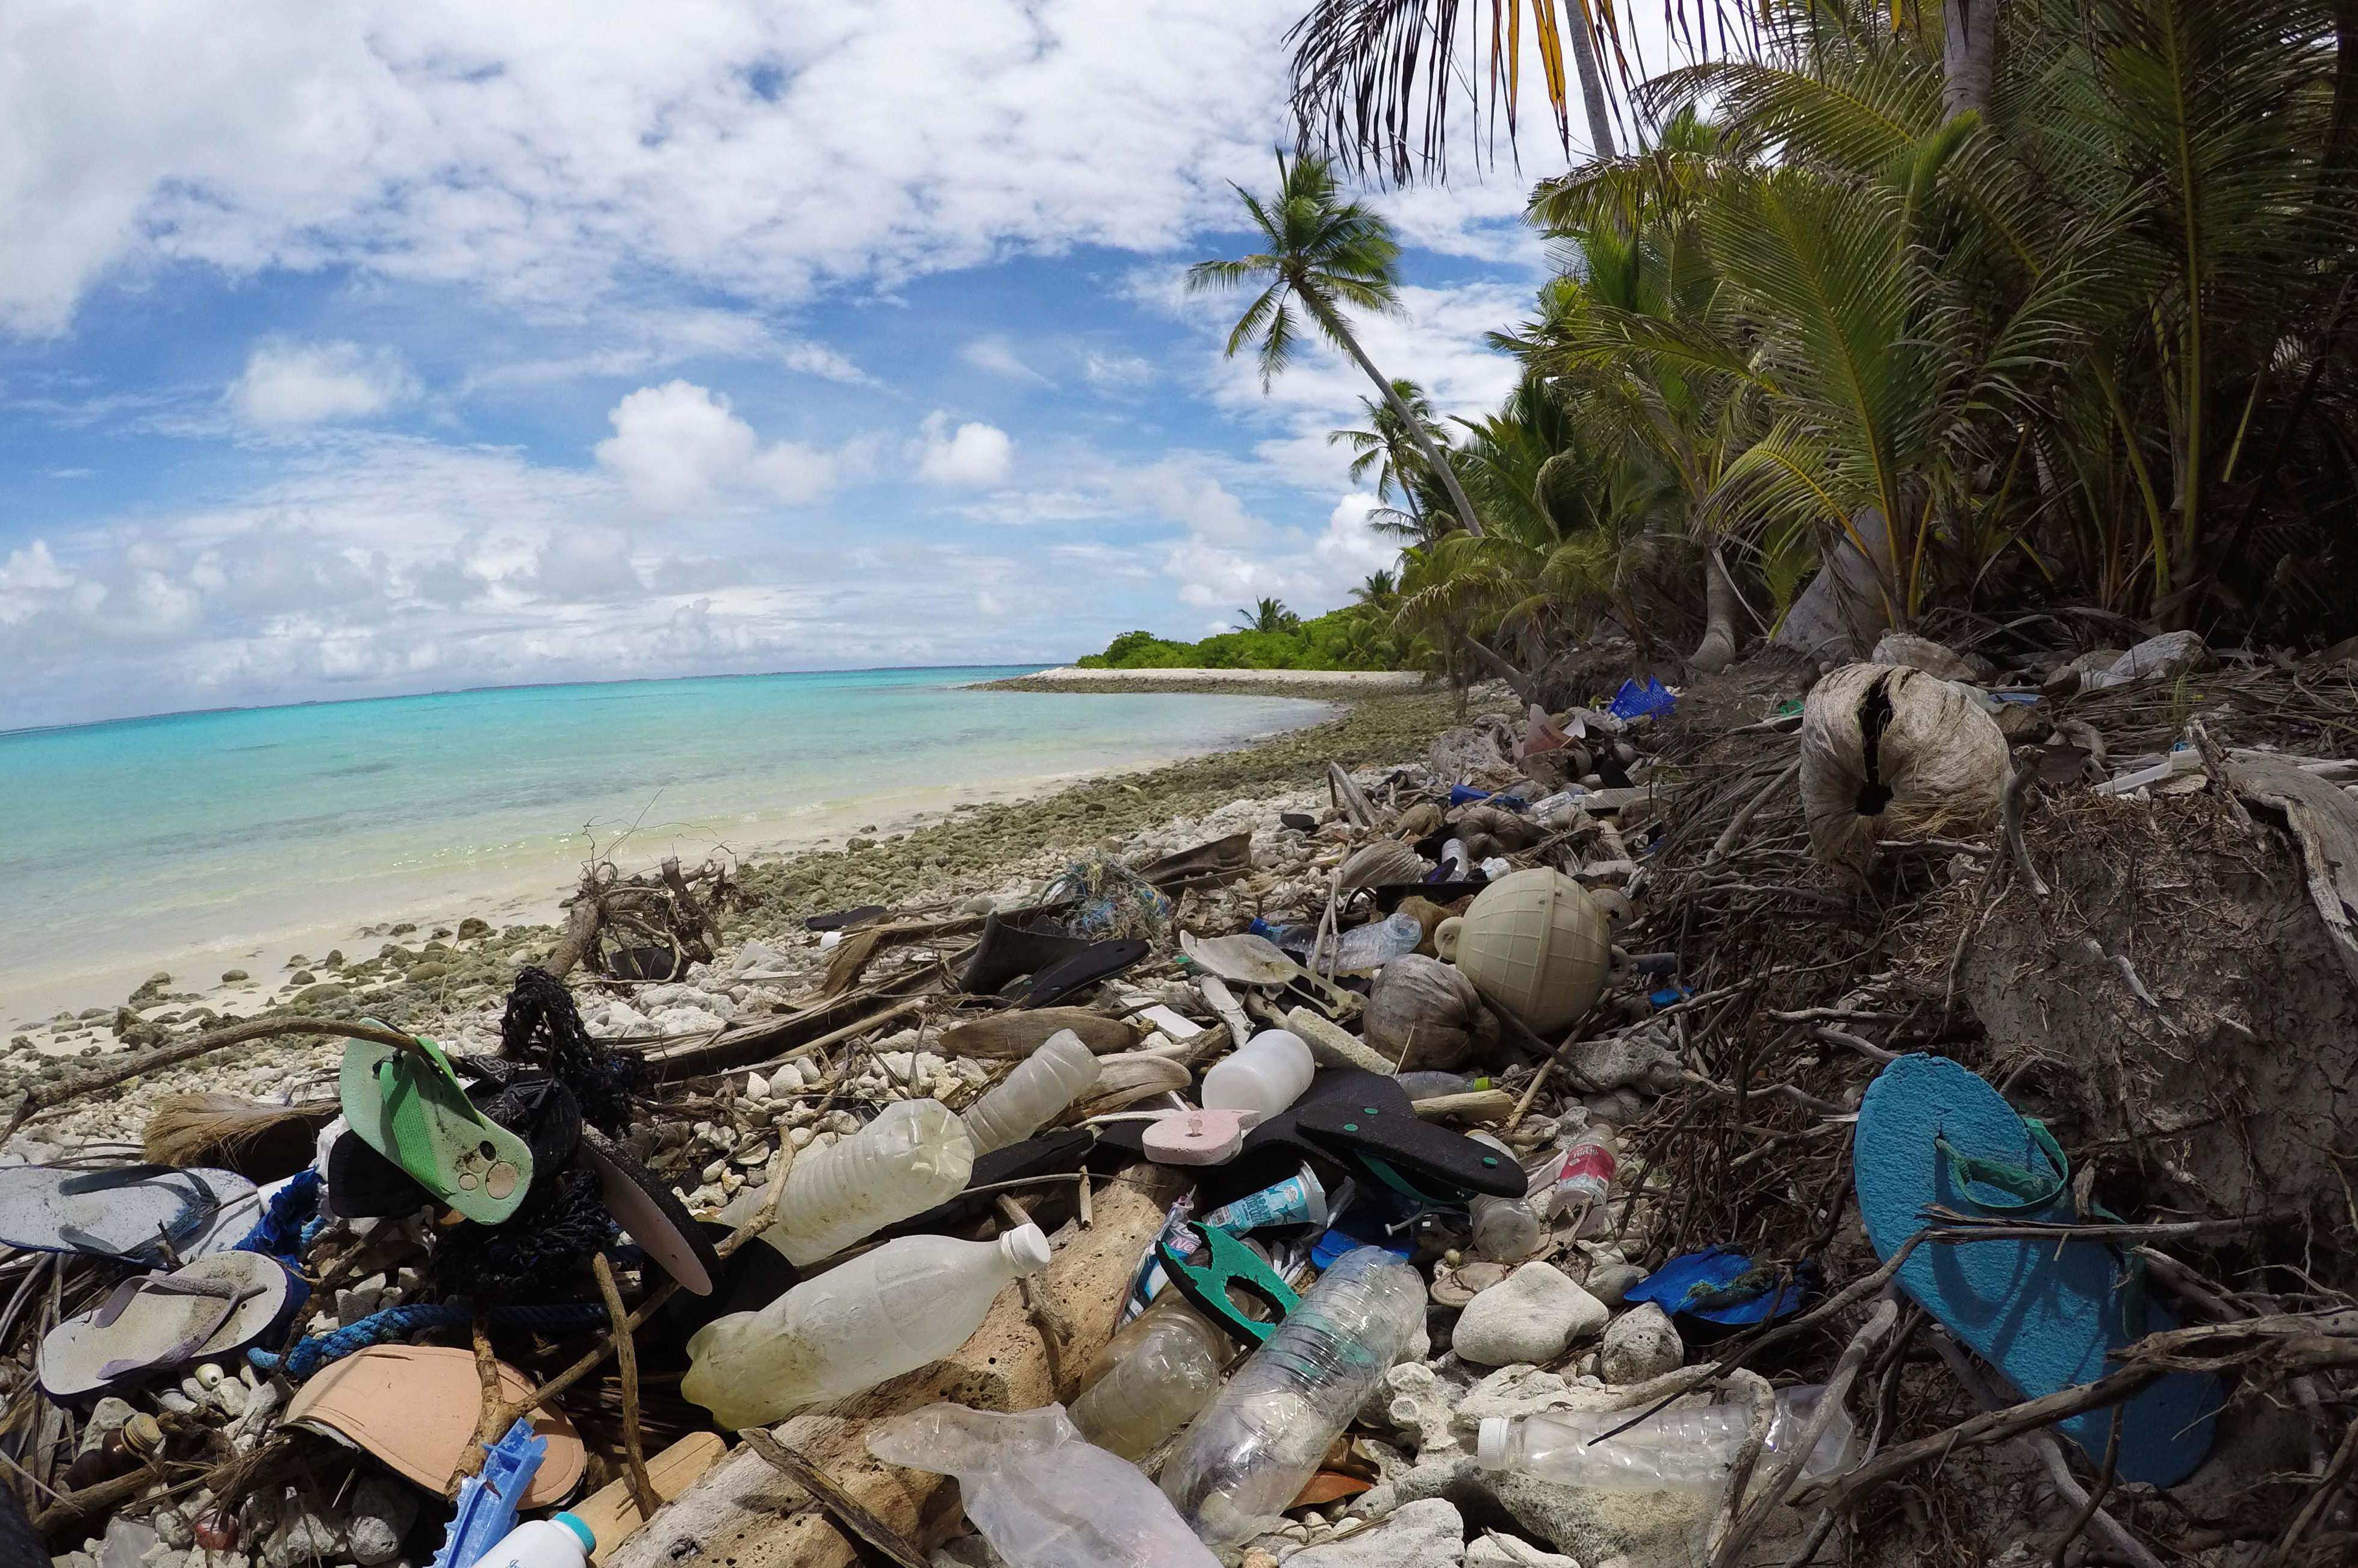 One contestant on the show says we should ban single-use plastic. Photo: AFP